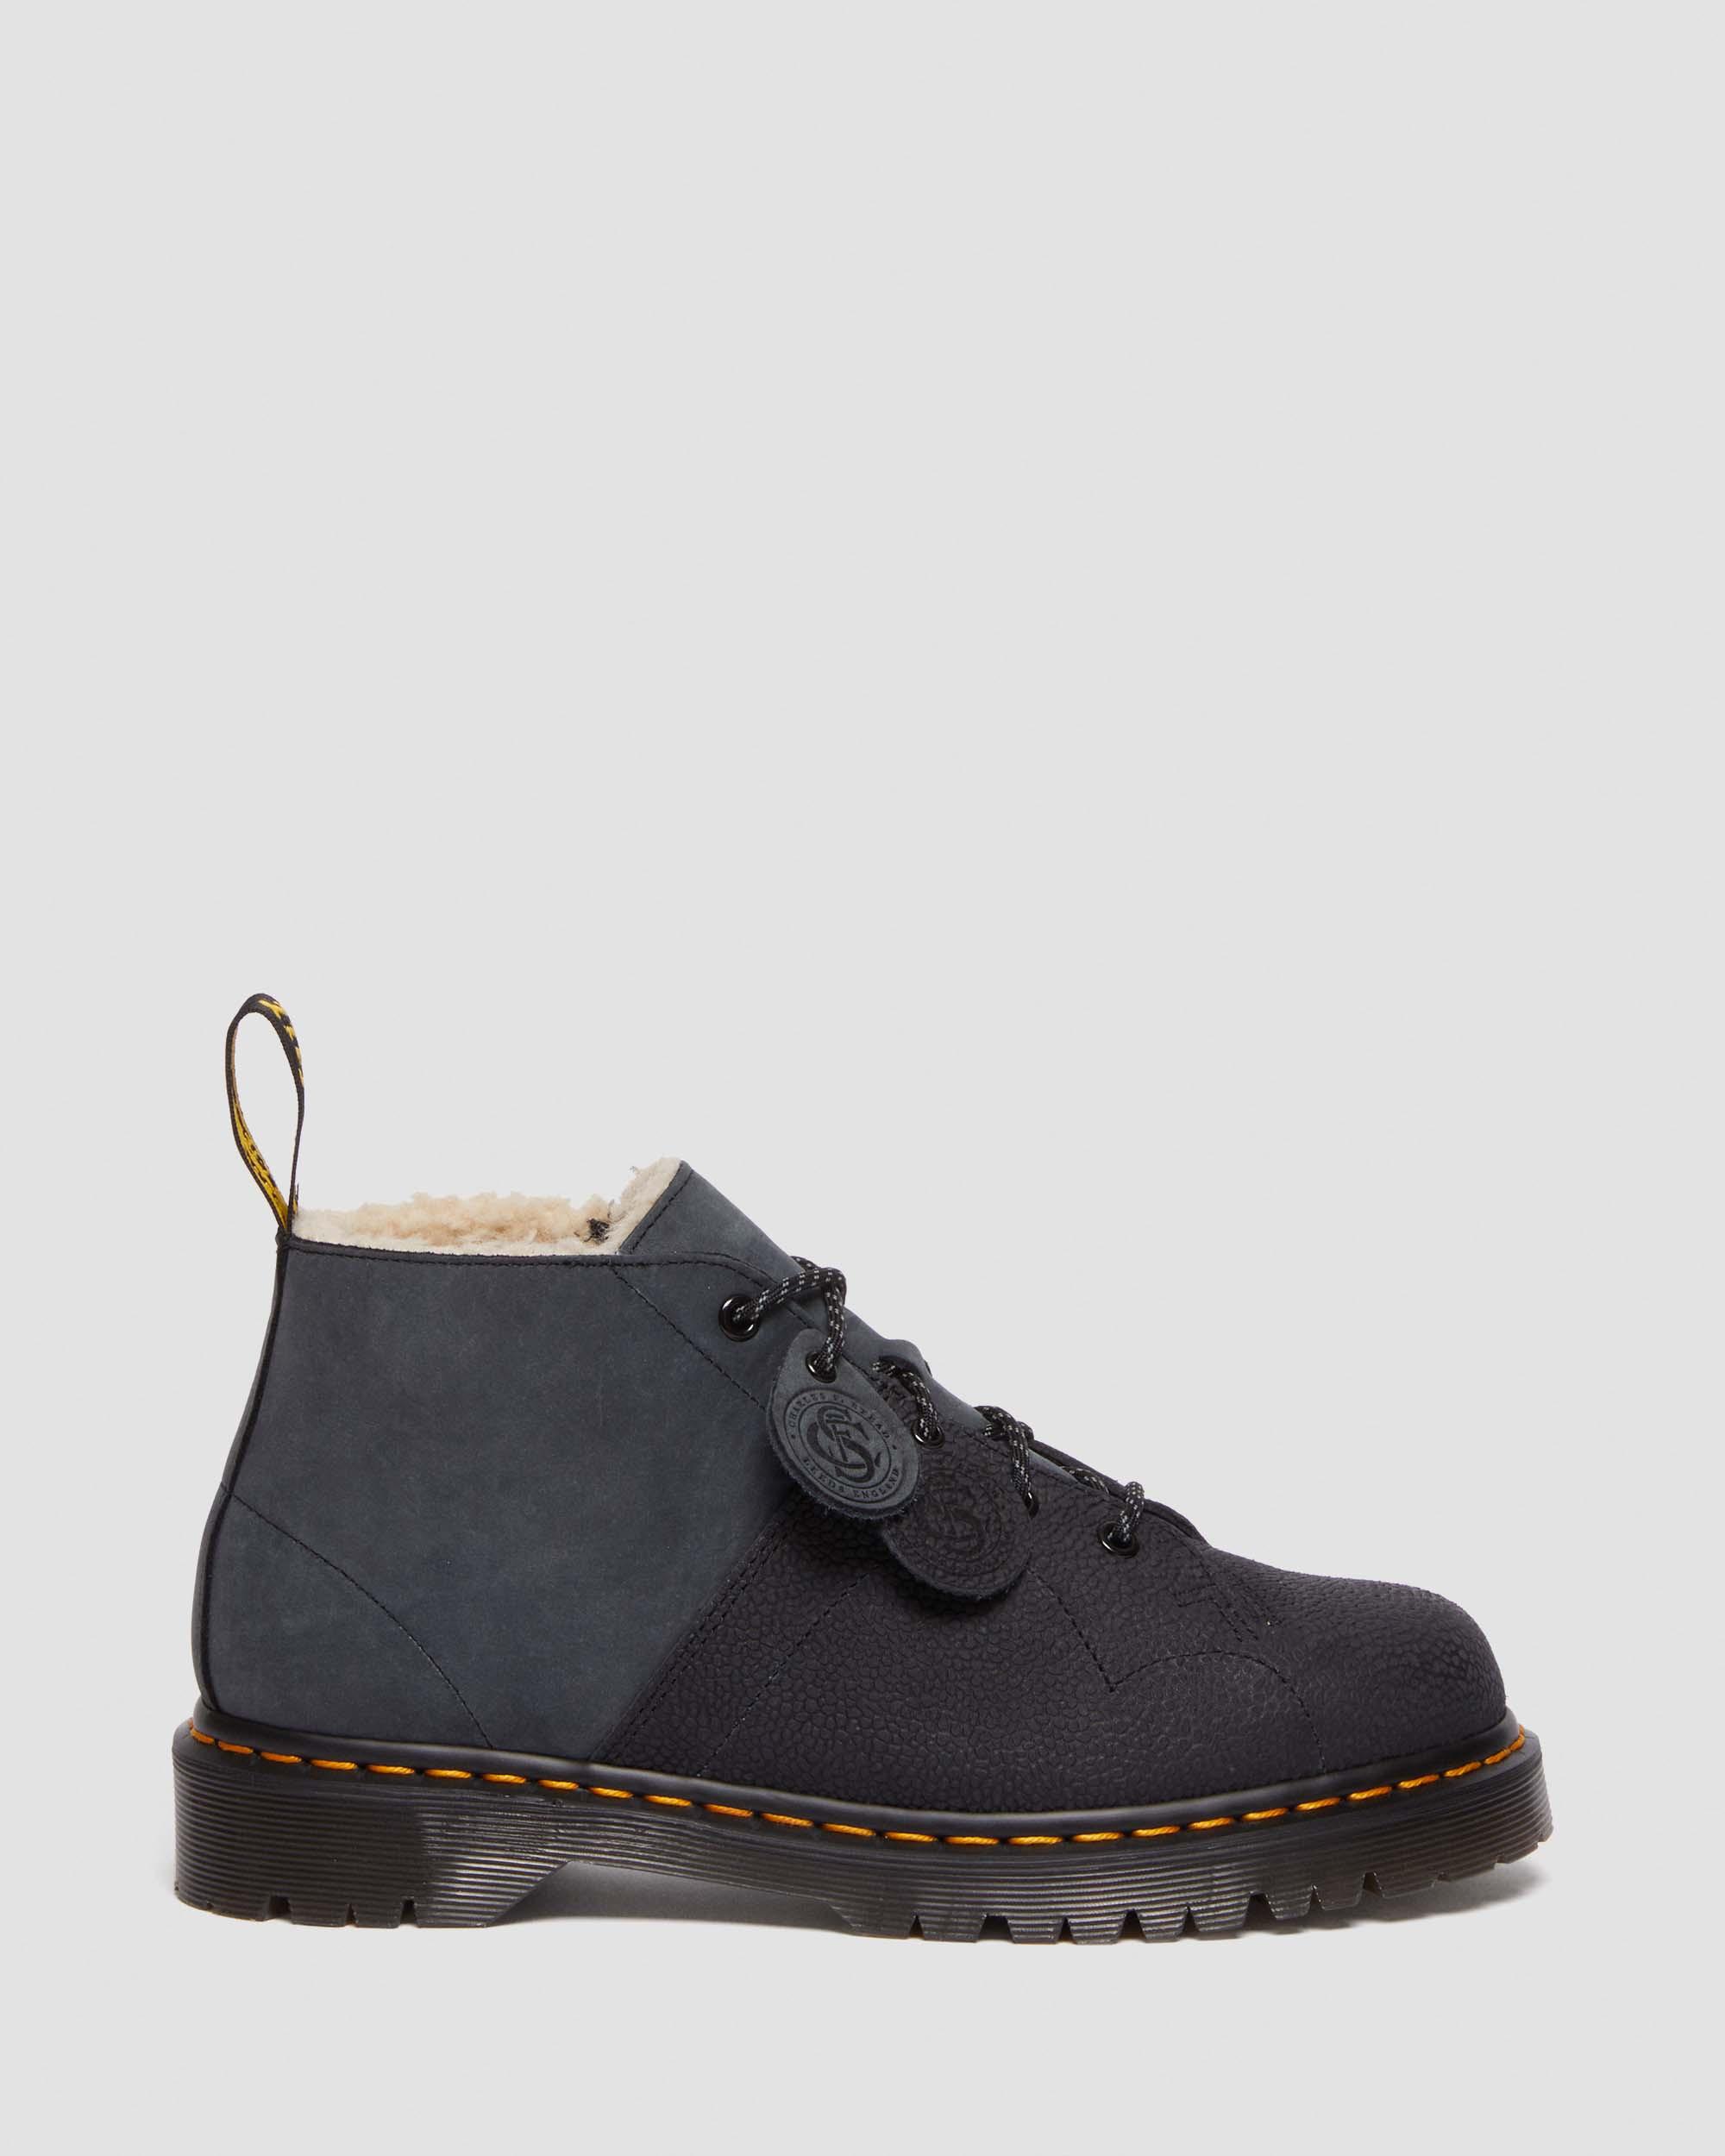 Church Nubuck Leather Ankle Boots in BLACK